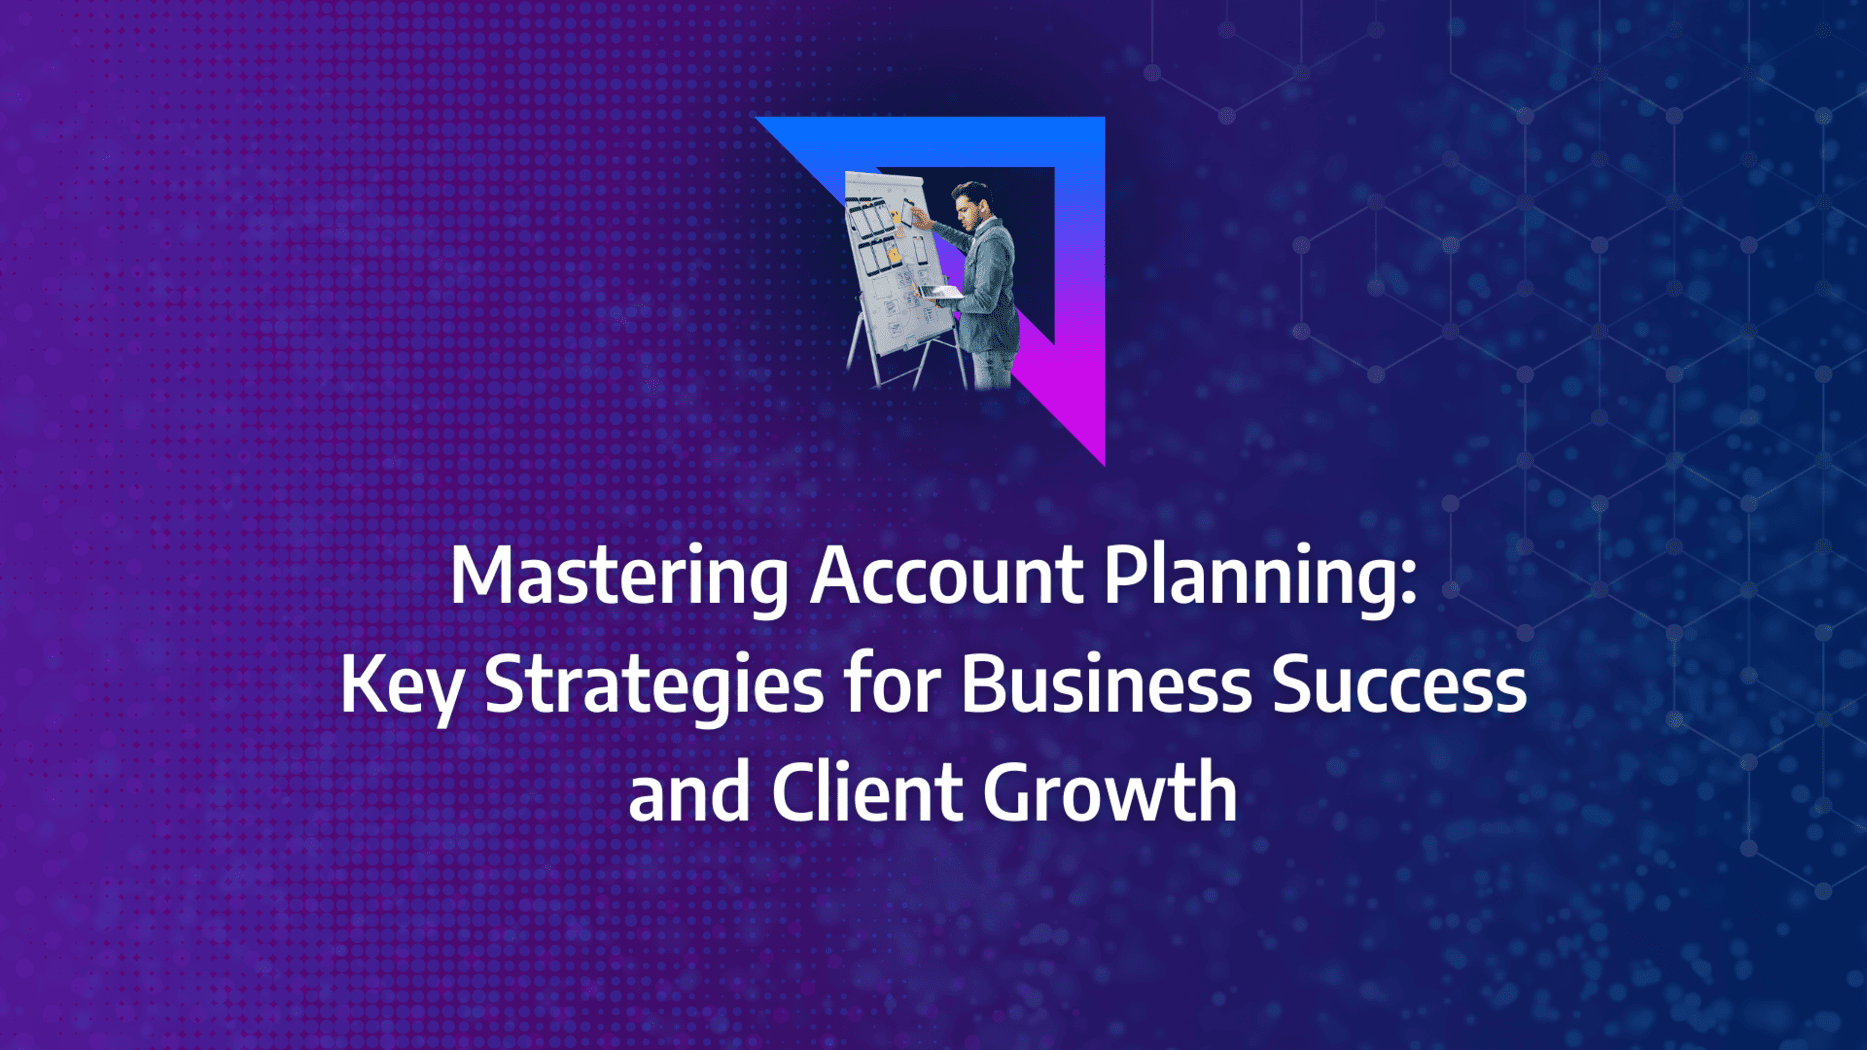 Account planning: Driving business success through meticulous account planning strategy, innovative key account planning methods, rigorous account planning processes, and strategic account planning methodologies.: strategy framework diagram for account planning strategy, key account planning, account planning methodology, account planning process